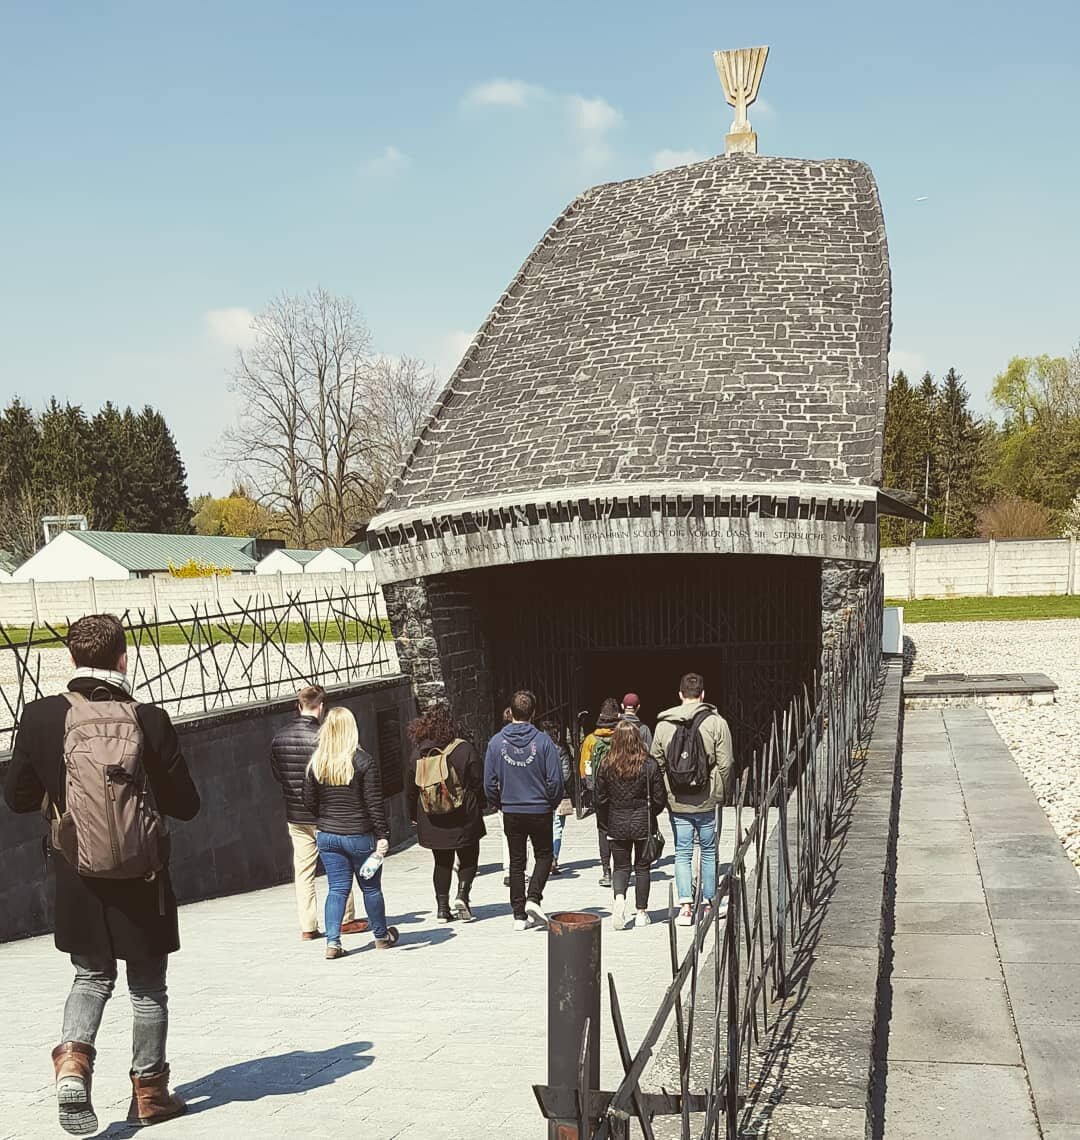 Visiting the Jewish Memorial. Today's group was full of interesting questions - always a good sign.

#dachautour #dachauconcentrationcamp #dachau #munich #germany #neverforget #history